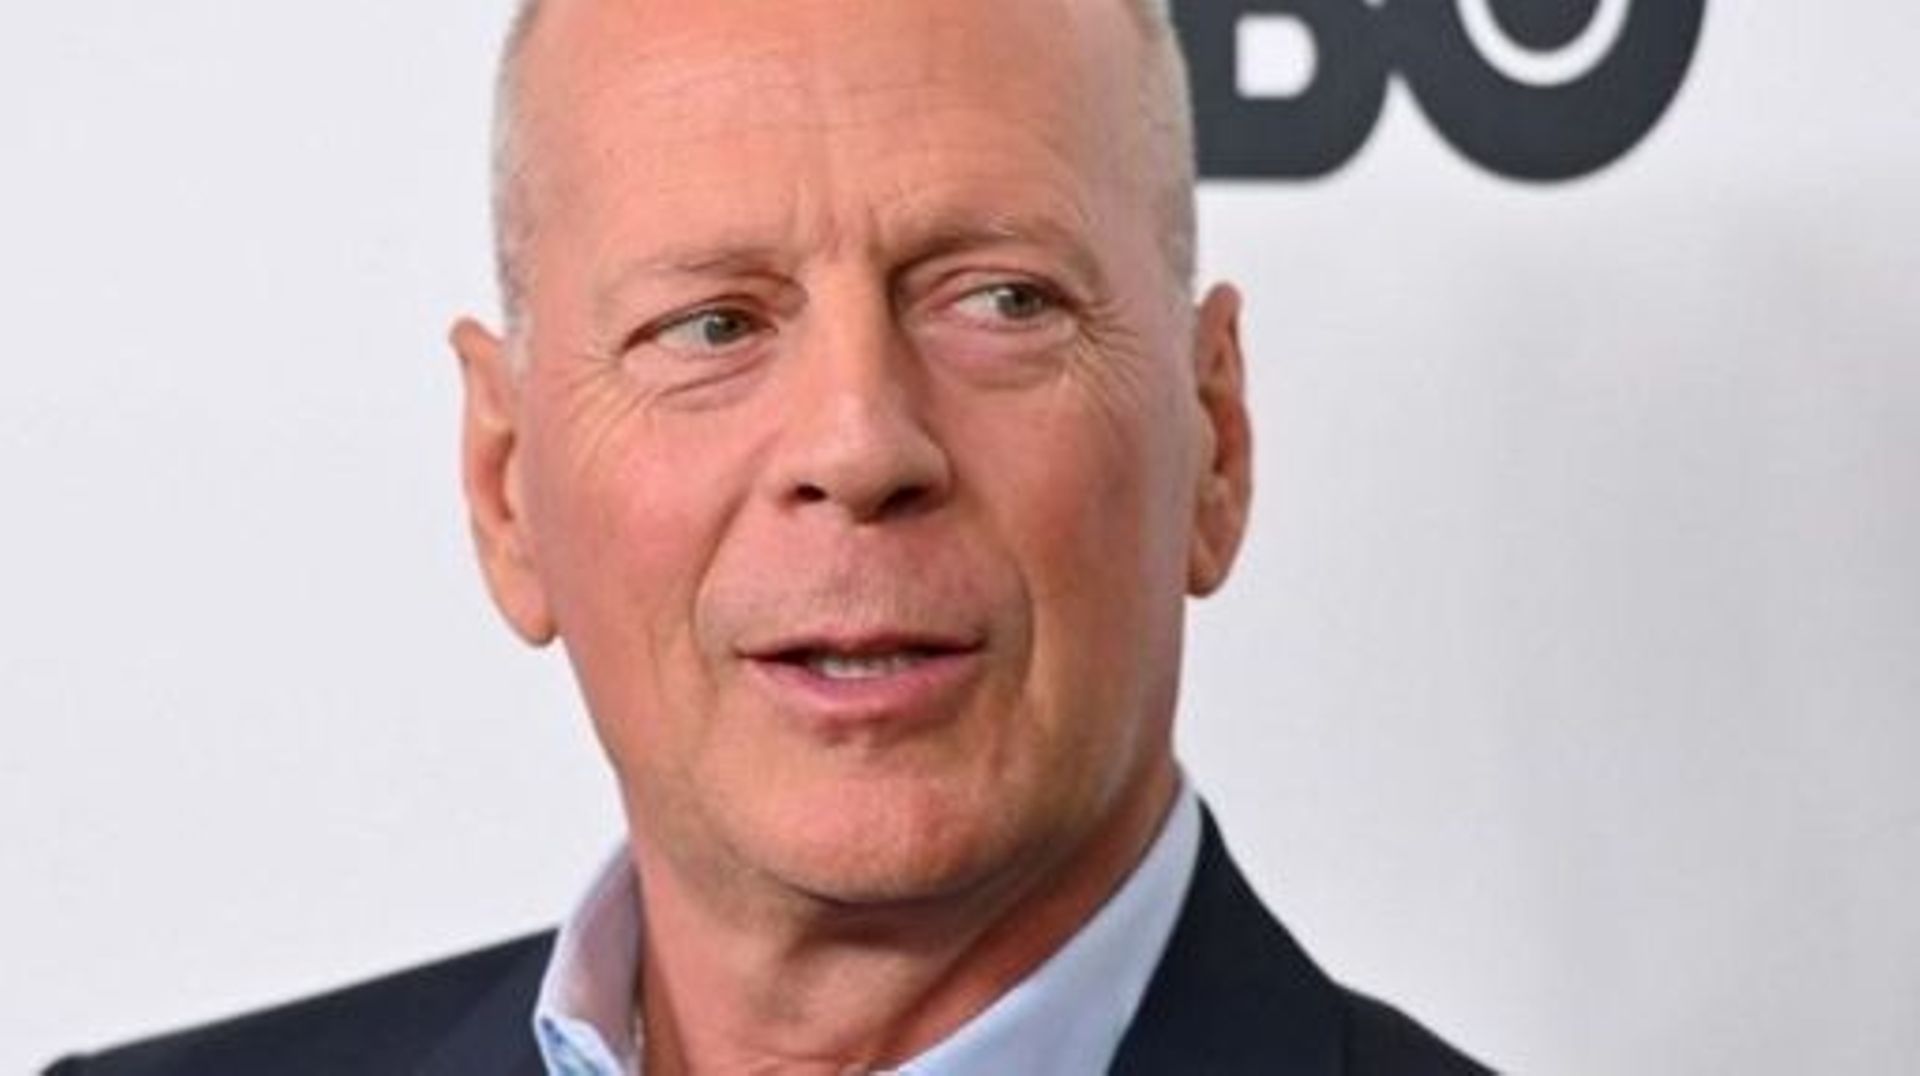 US actor Bruce Willis attends the premiere of Motherless Brooklyn during the 57th New York Film Festival at Alice Tully Hall on October 11, 2019 in New York City.  Angela Weiss / AFP